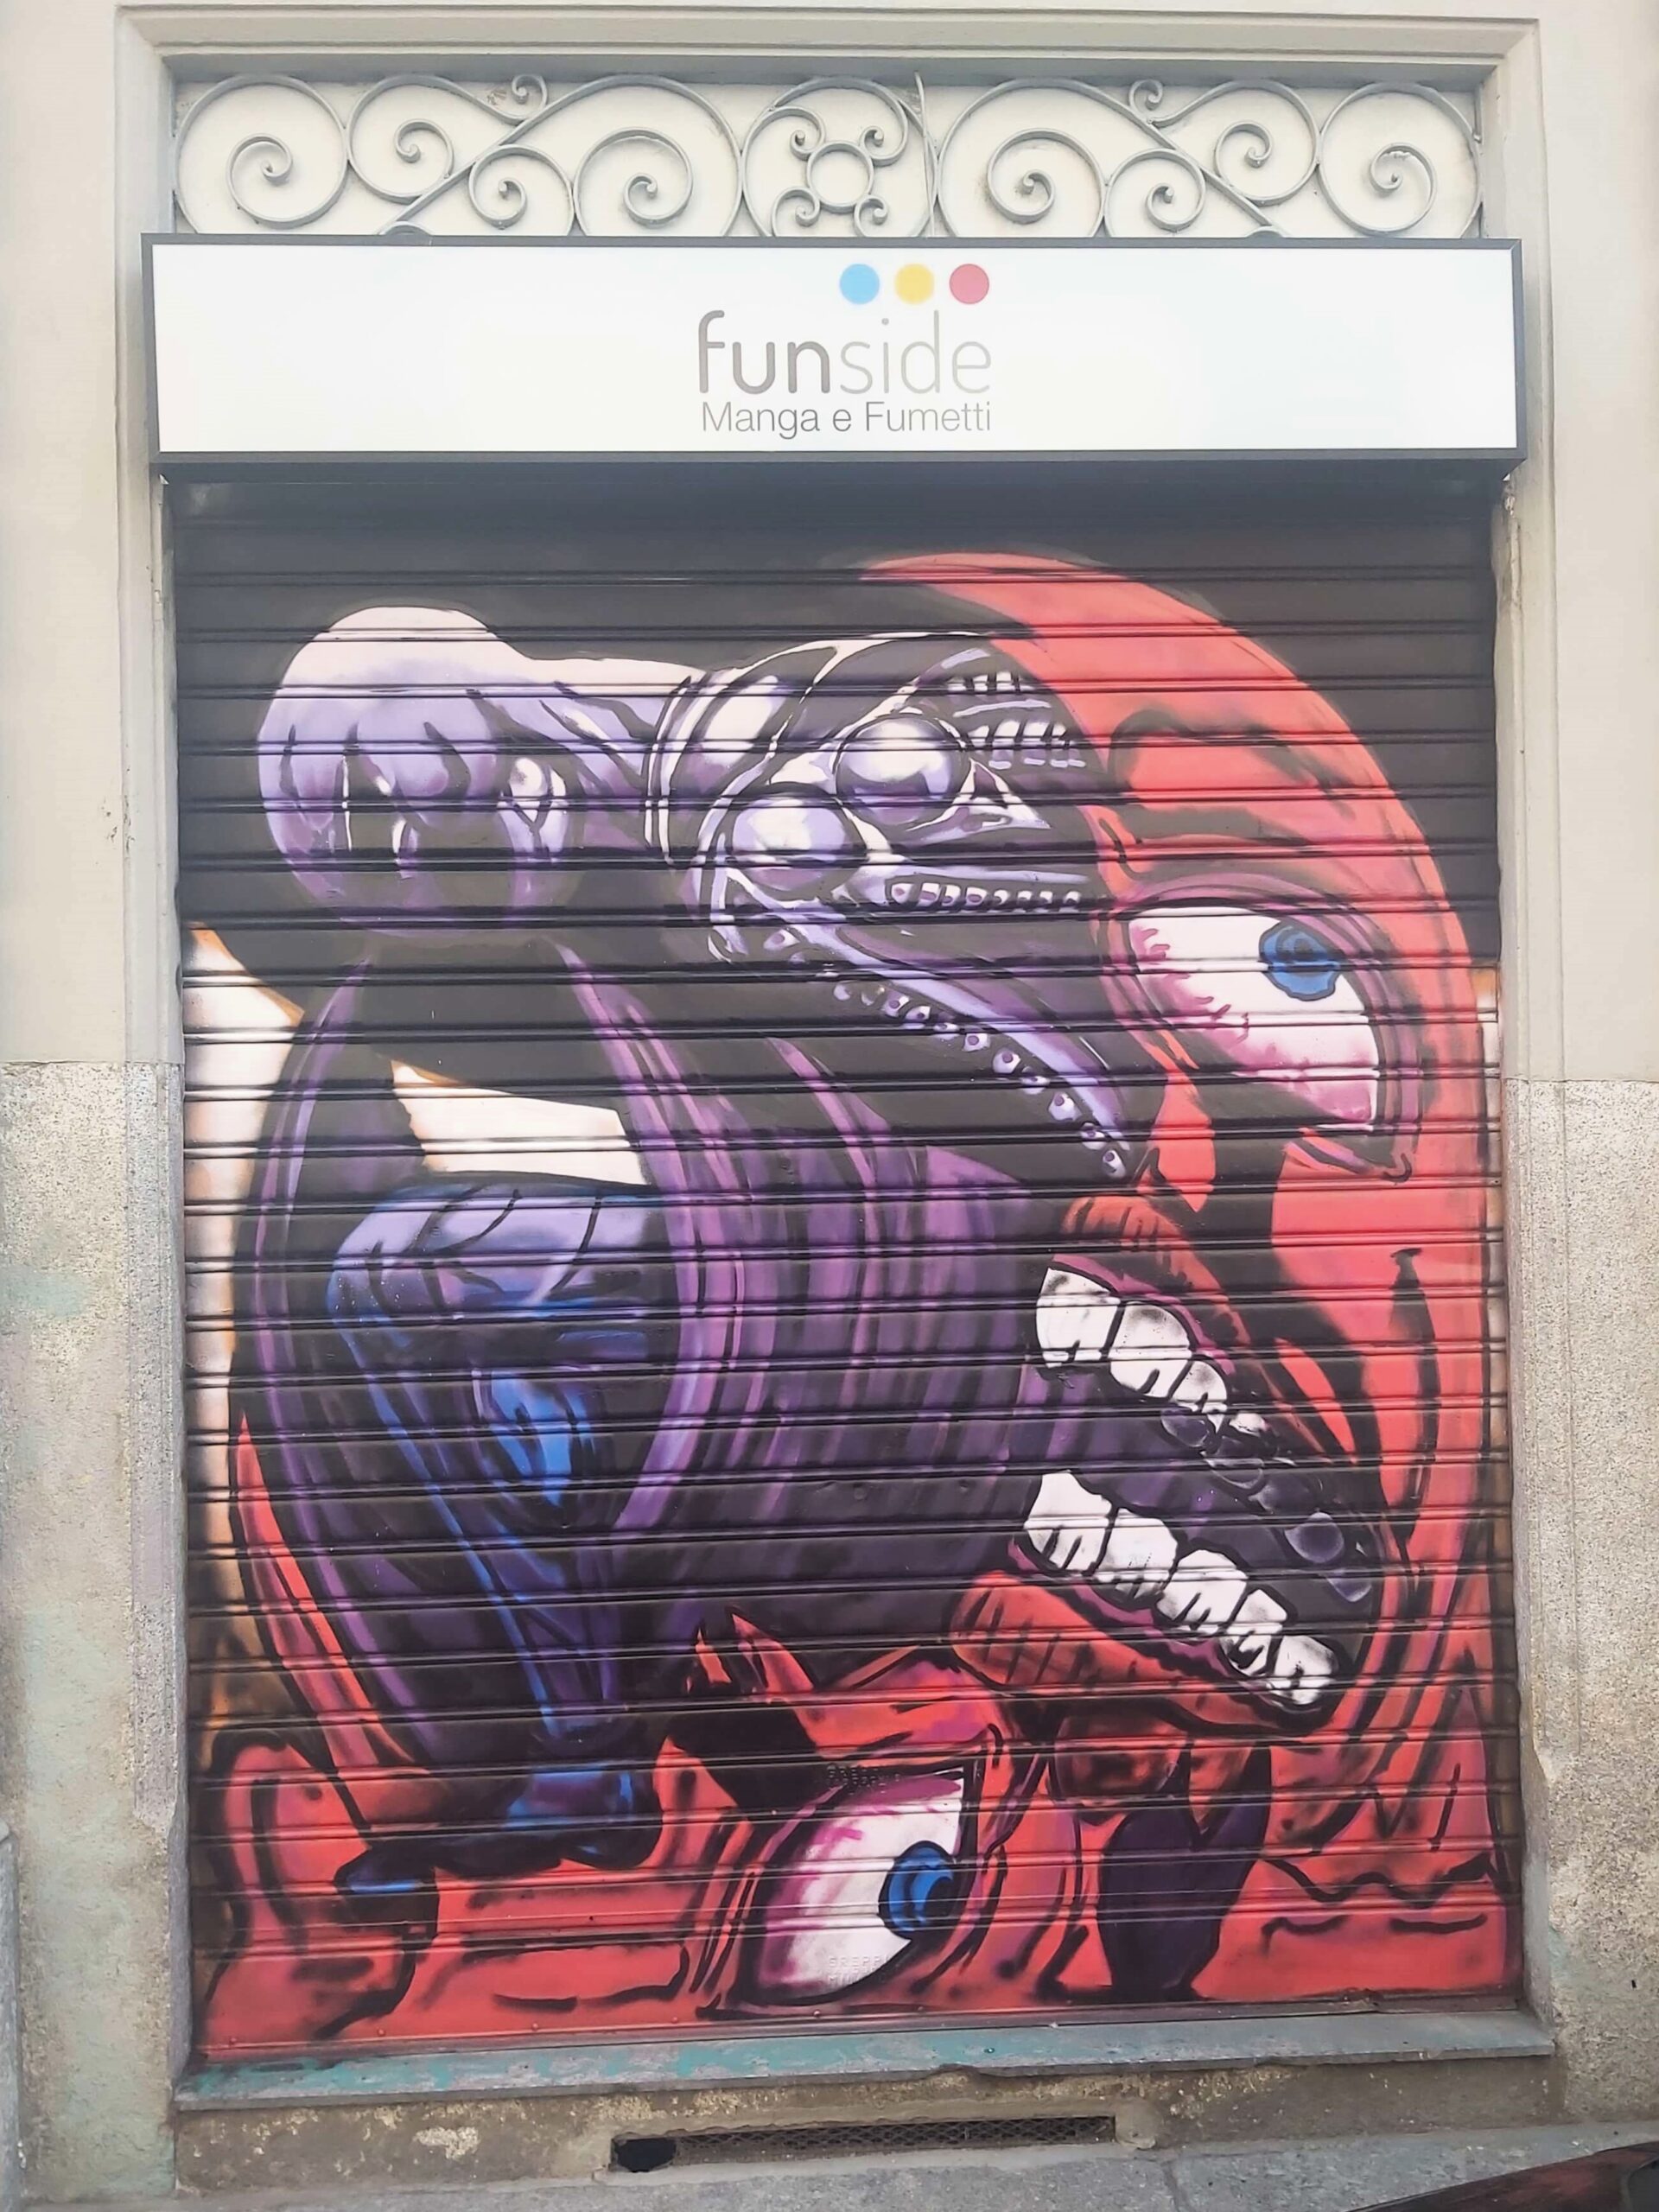 A graffiti image of a monster in Milan, Italy